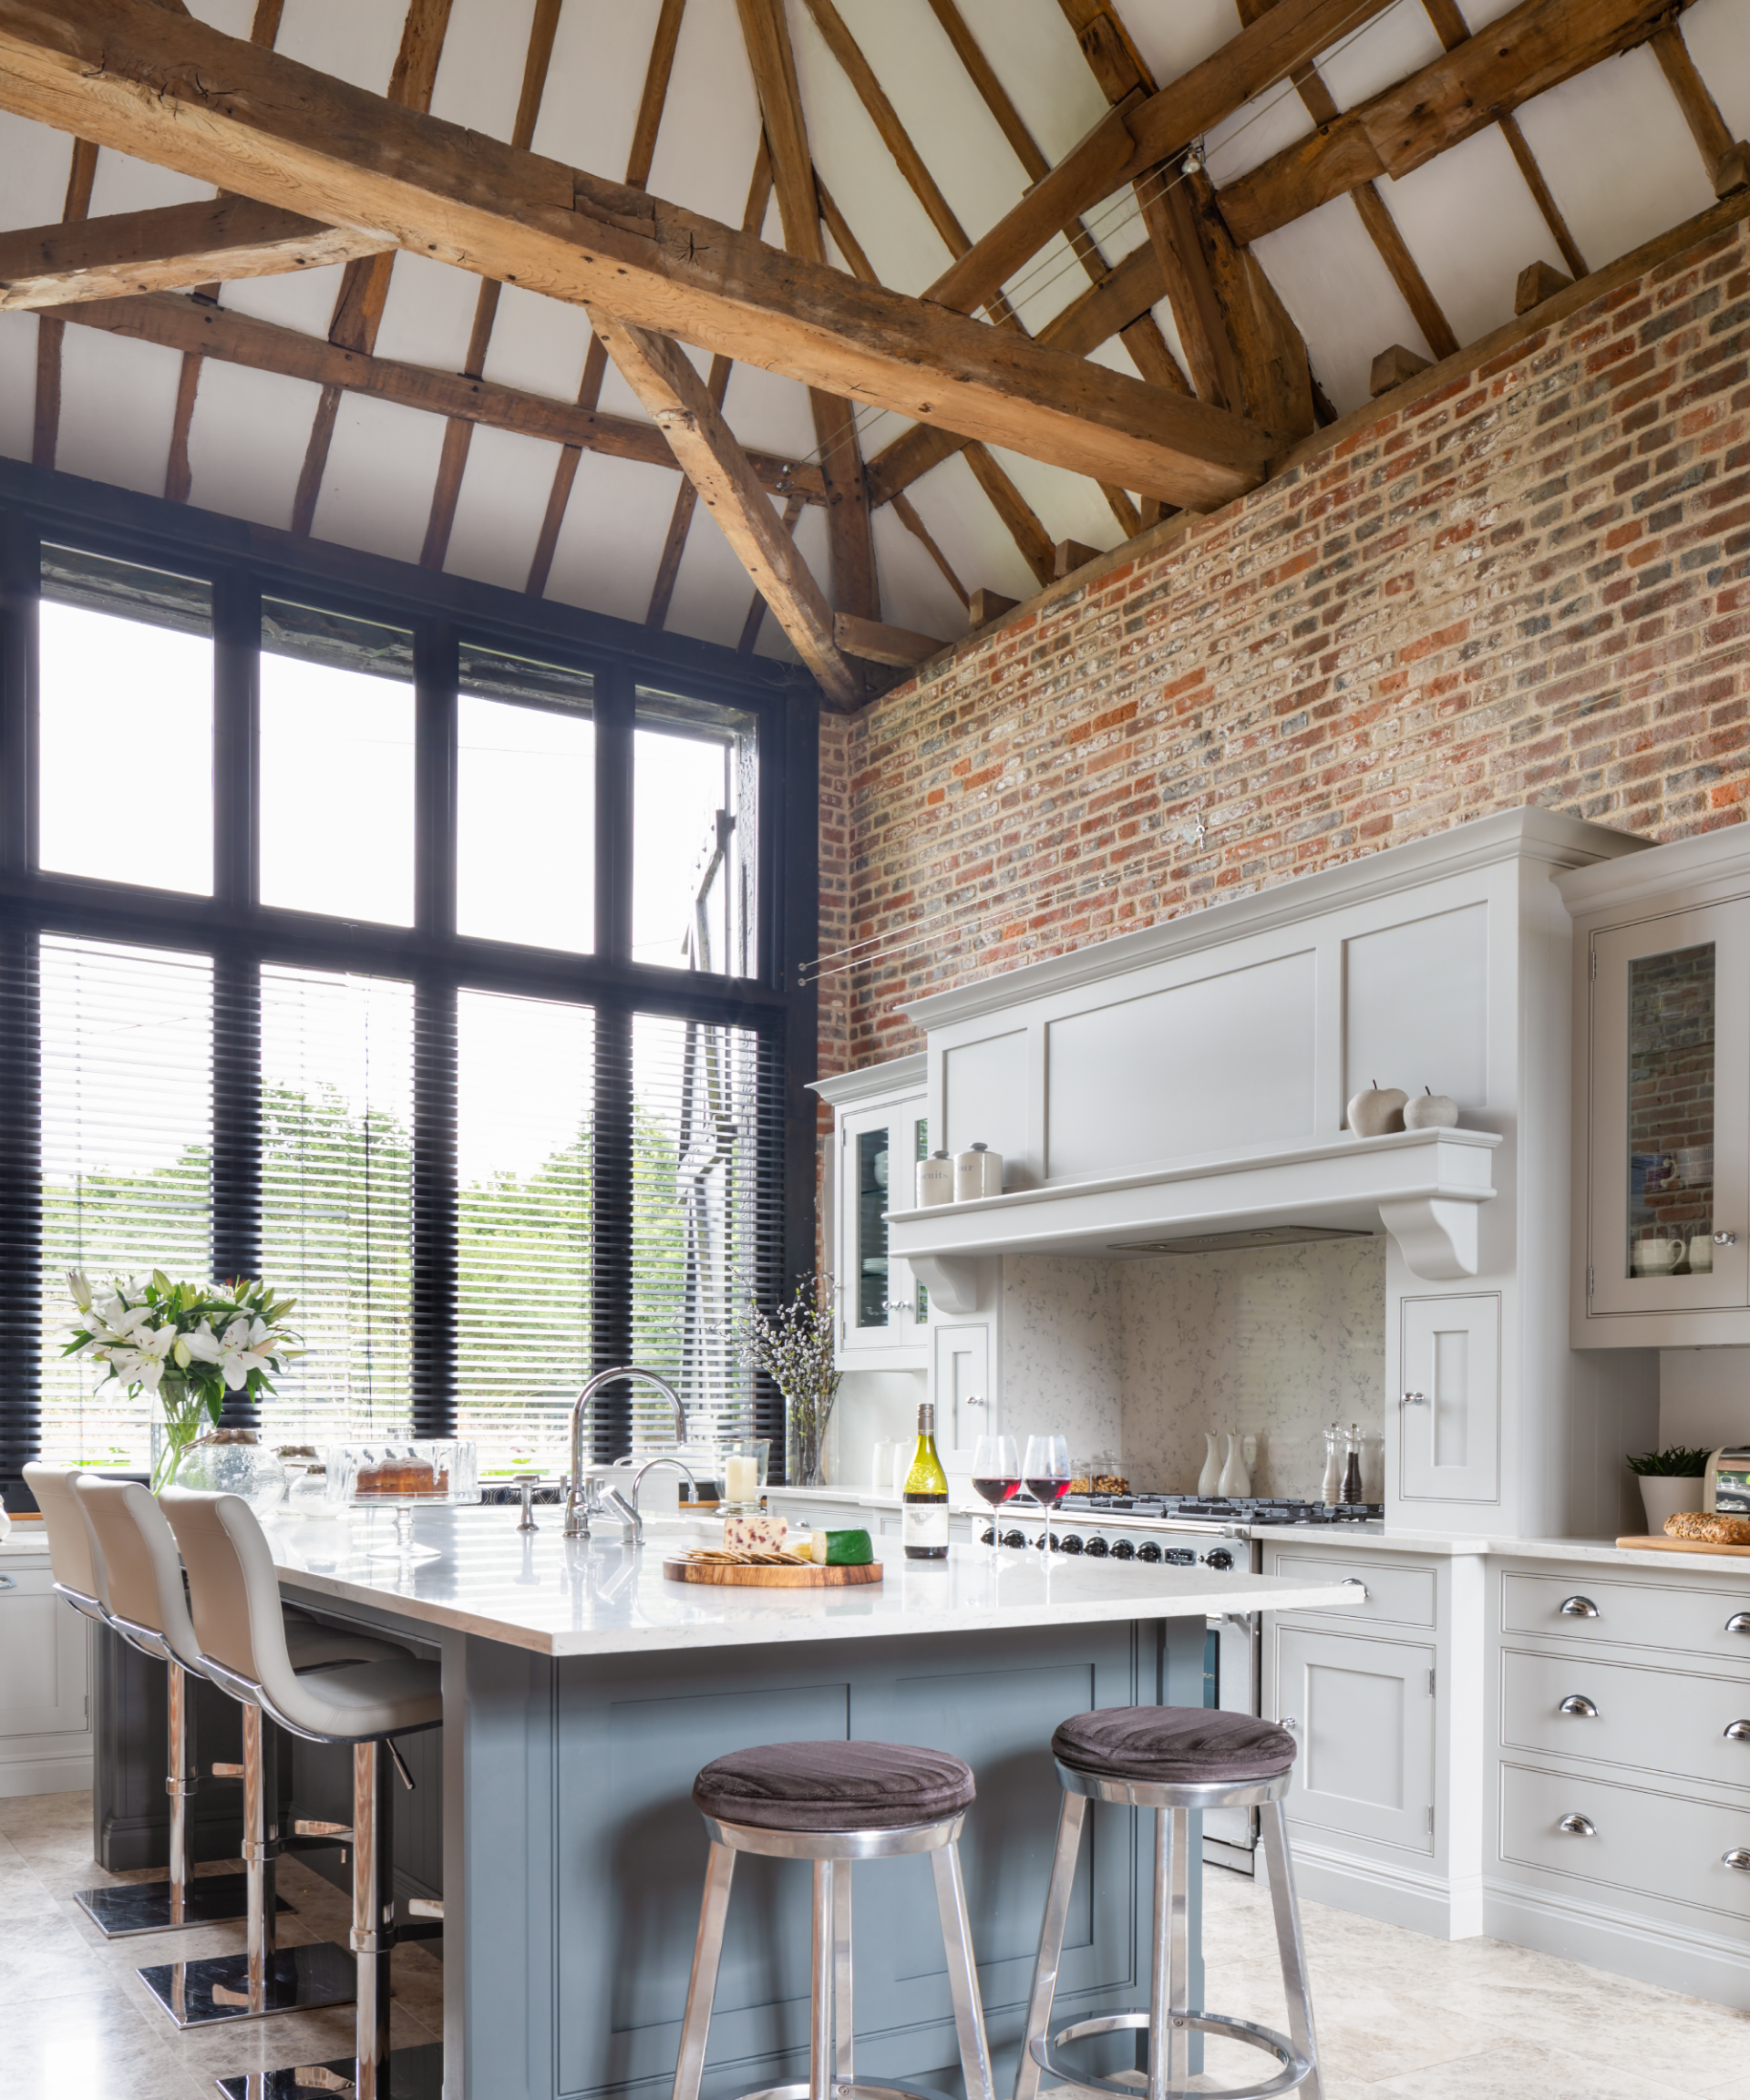 <p>                     If you're lucky enough to have original features like wooden beams, exposed brick or fireplaces, there's every reason to incorporate them into your modern kitchen. The mix of old and new adds interest to the room and gives your home its own unique twist.                   </p>